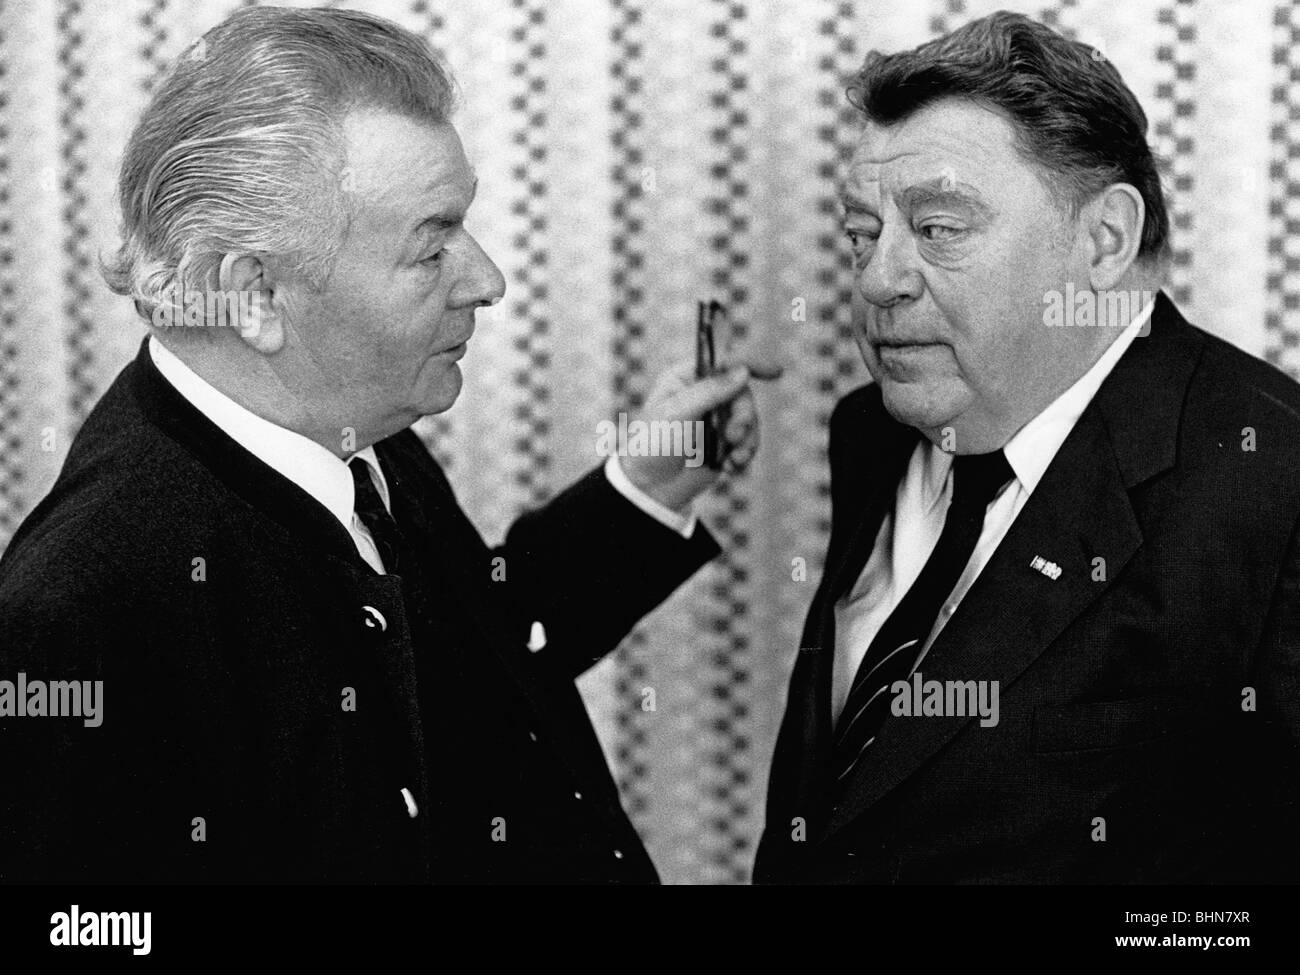 Strauss, Franz Josef, 6.9.1915 - 3.10.1988, German politician (CSU), Minister President of Bavaria 1978 - 1988, with the German Federal Minister for Economics Anton Jaumann, at the opening of a craft trade fair, Munich, March 1987, Stock Photo